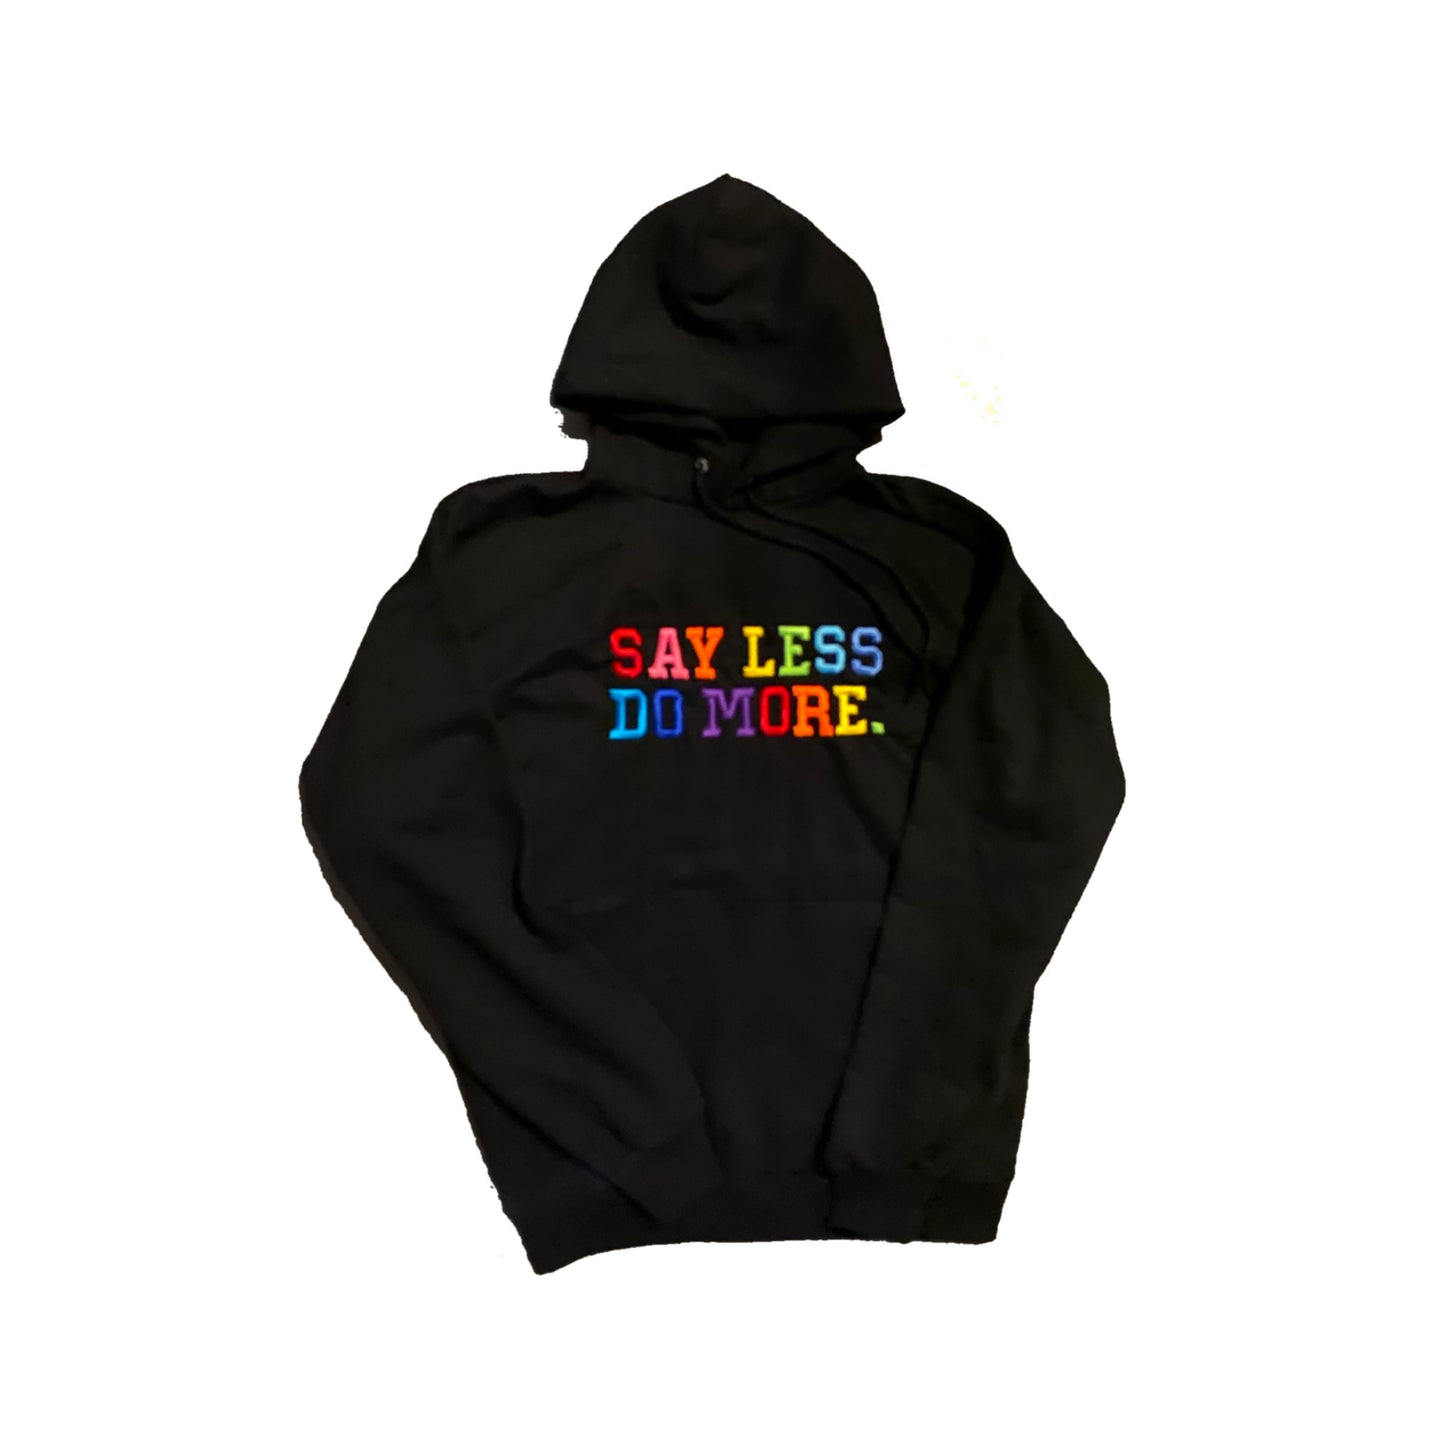 SAY LESS DO MORE Black Hoodie